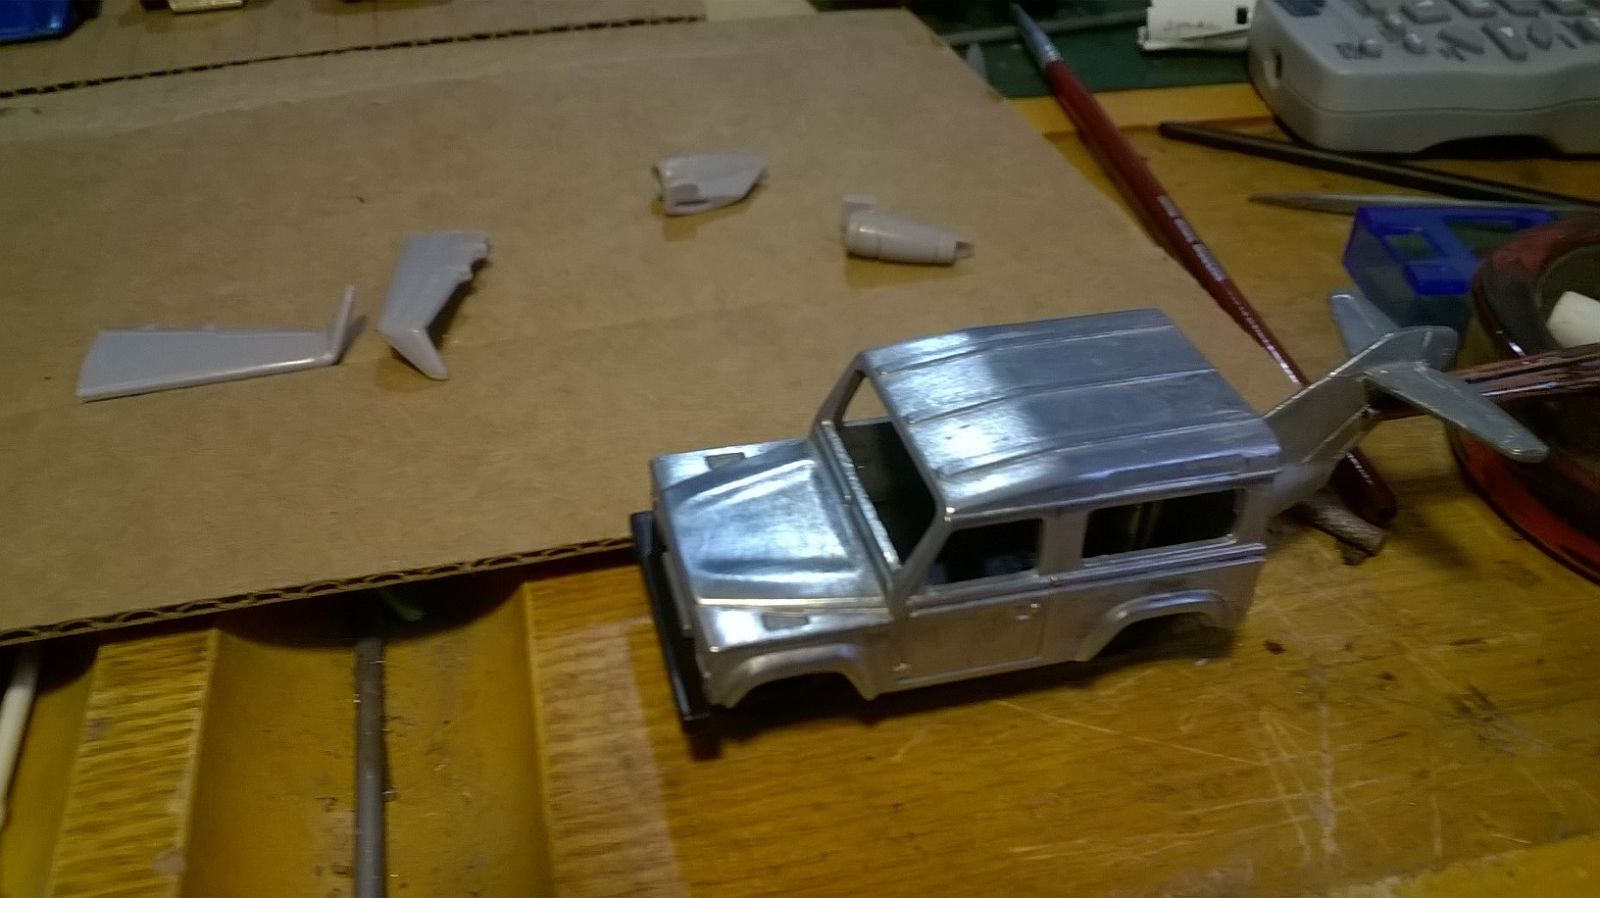 The engines fit perfectly between the rear fenders and the doors. It should look pretty interesting when finished.